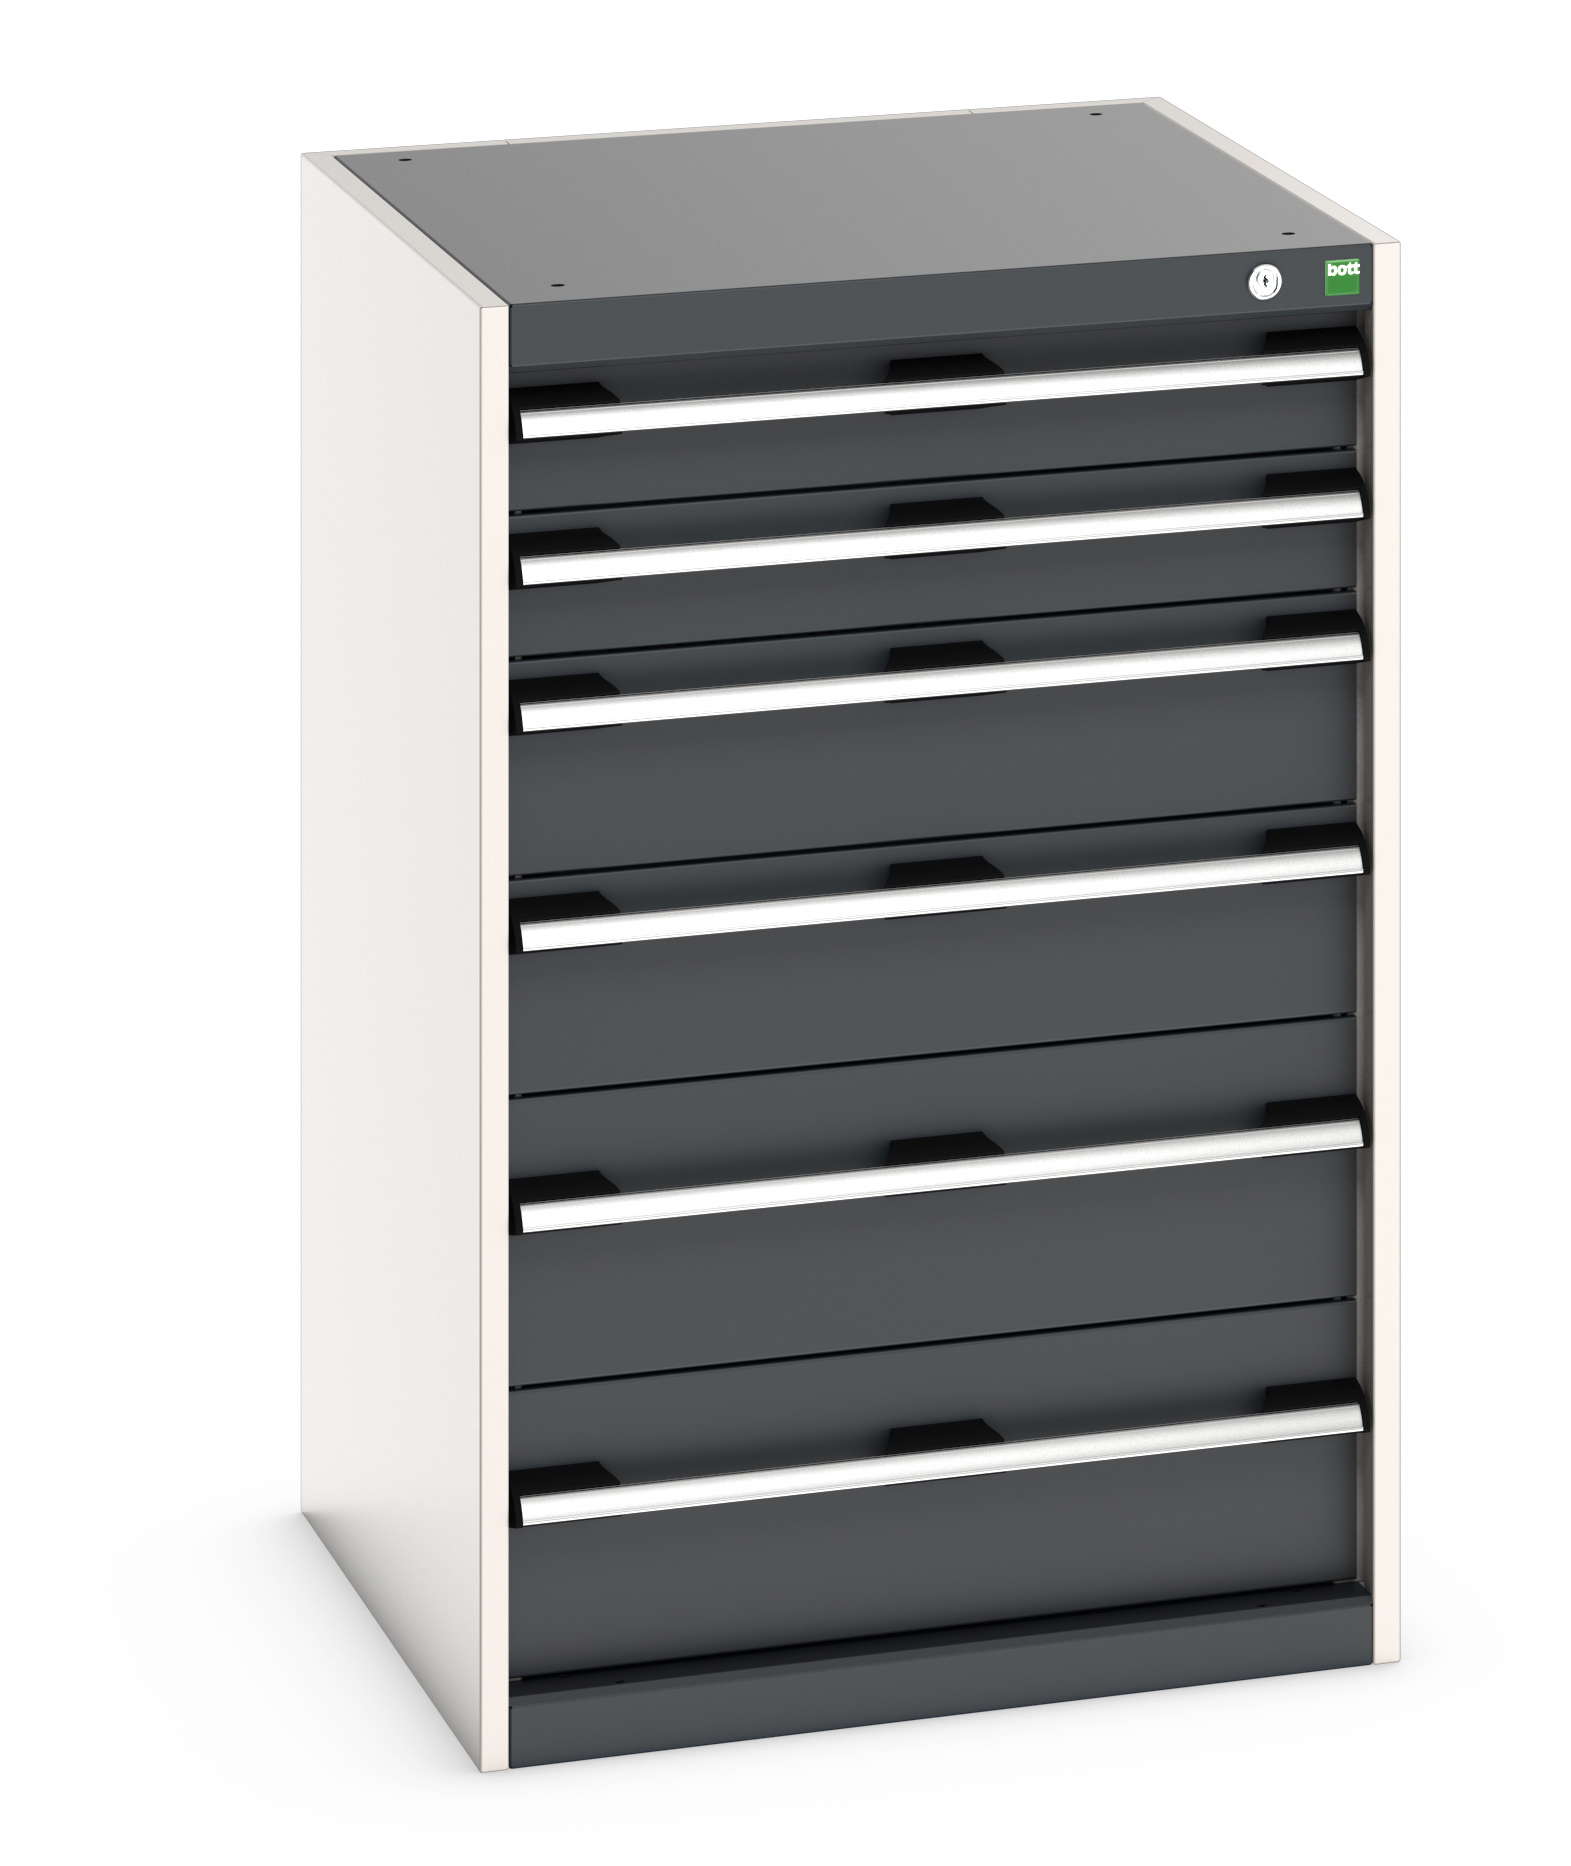 Bott Cubio Drawer Cabinet With 6 Drawers - 40019059.19V